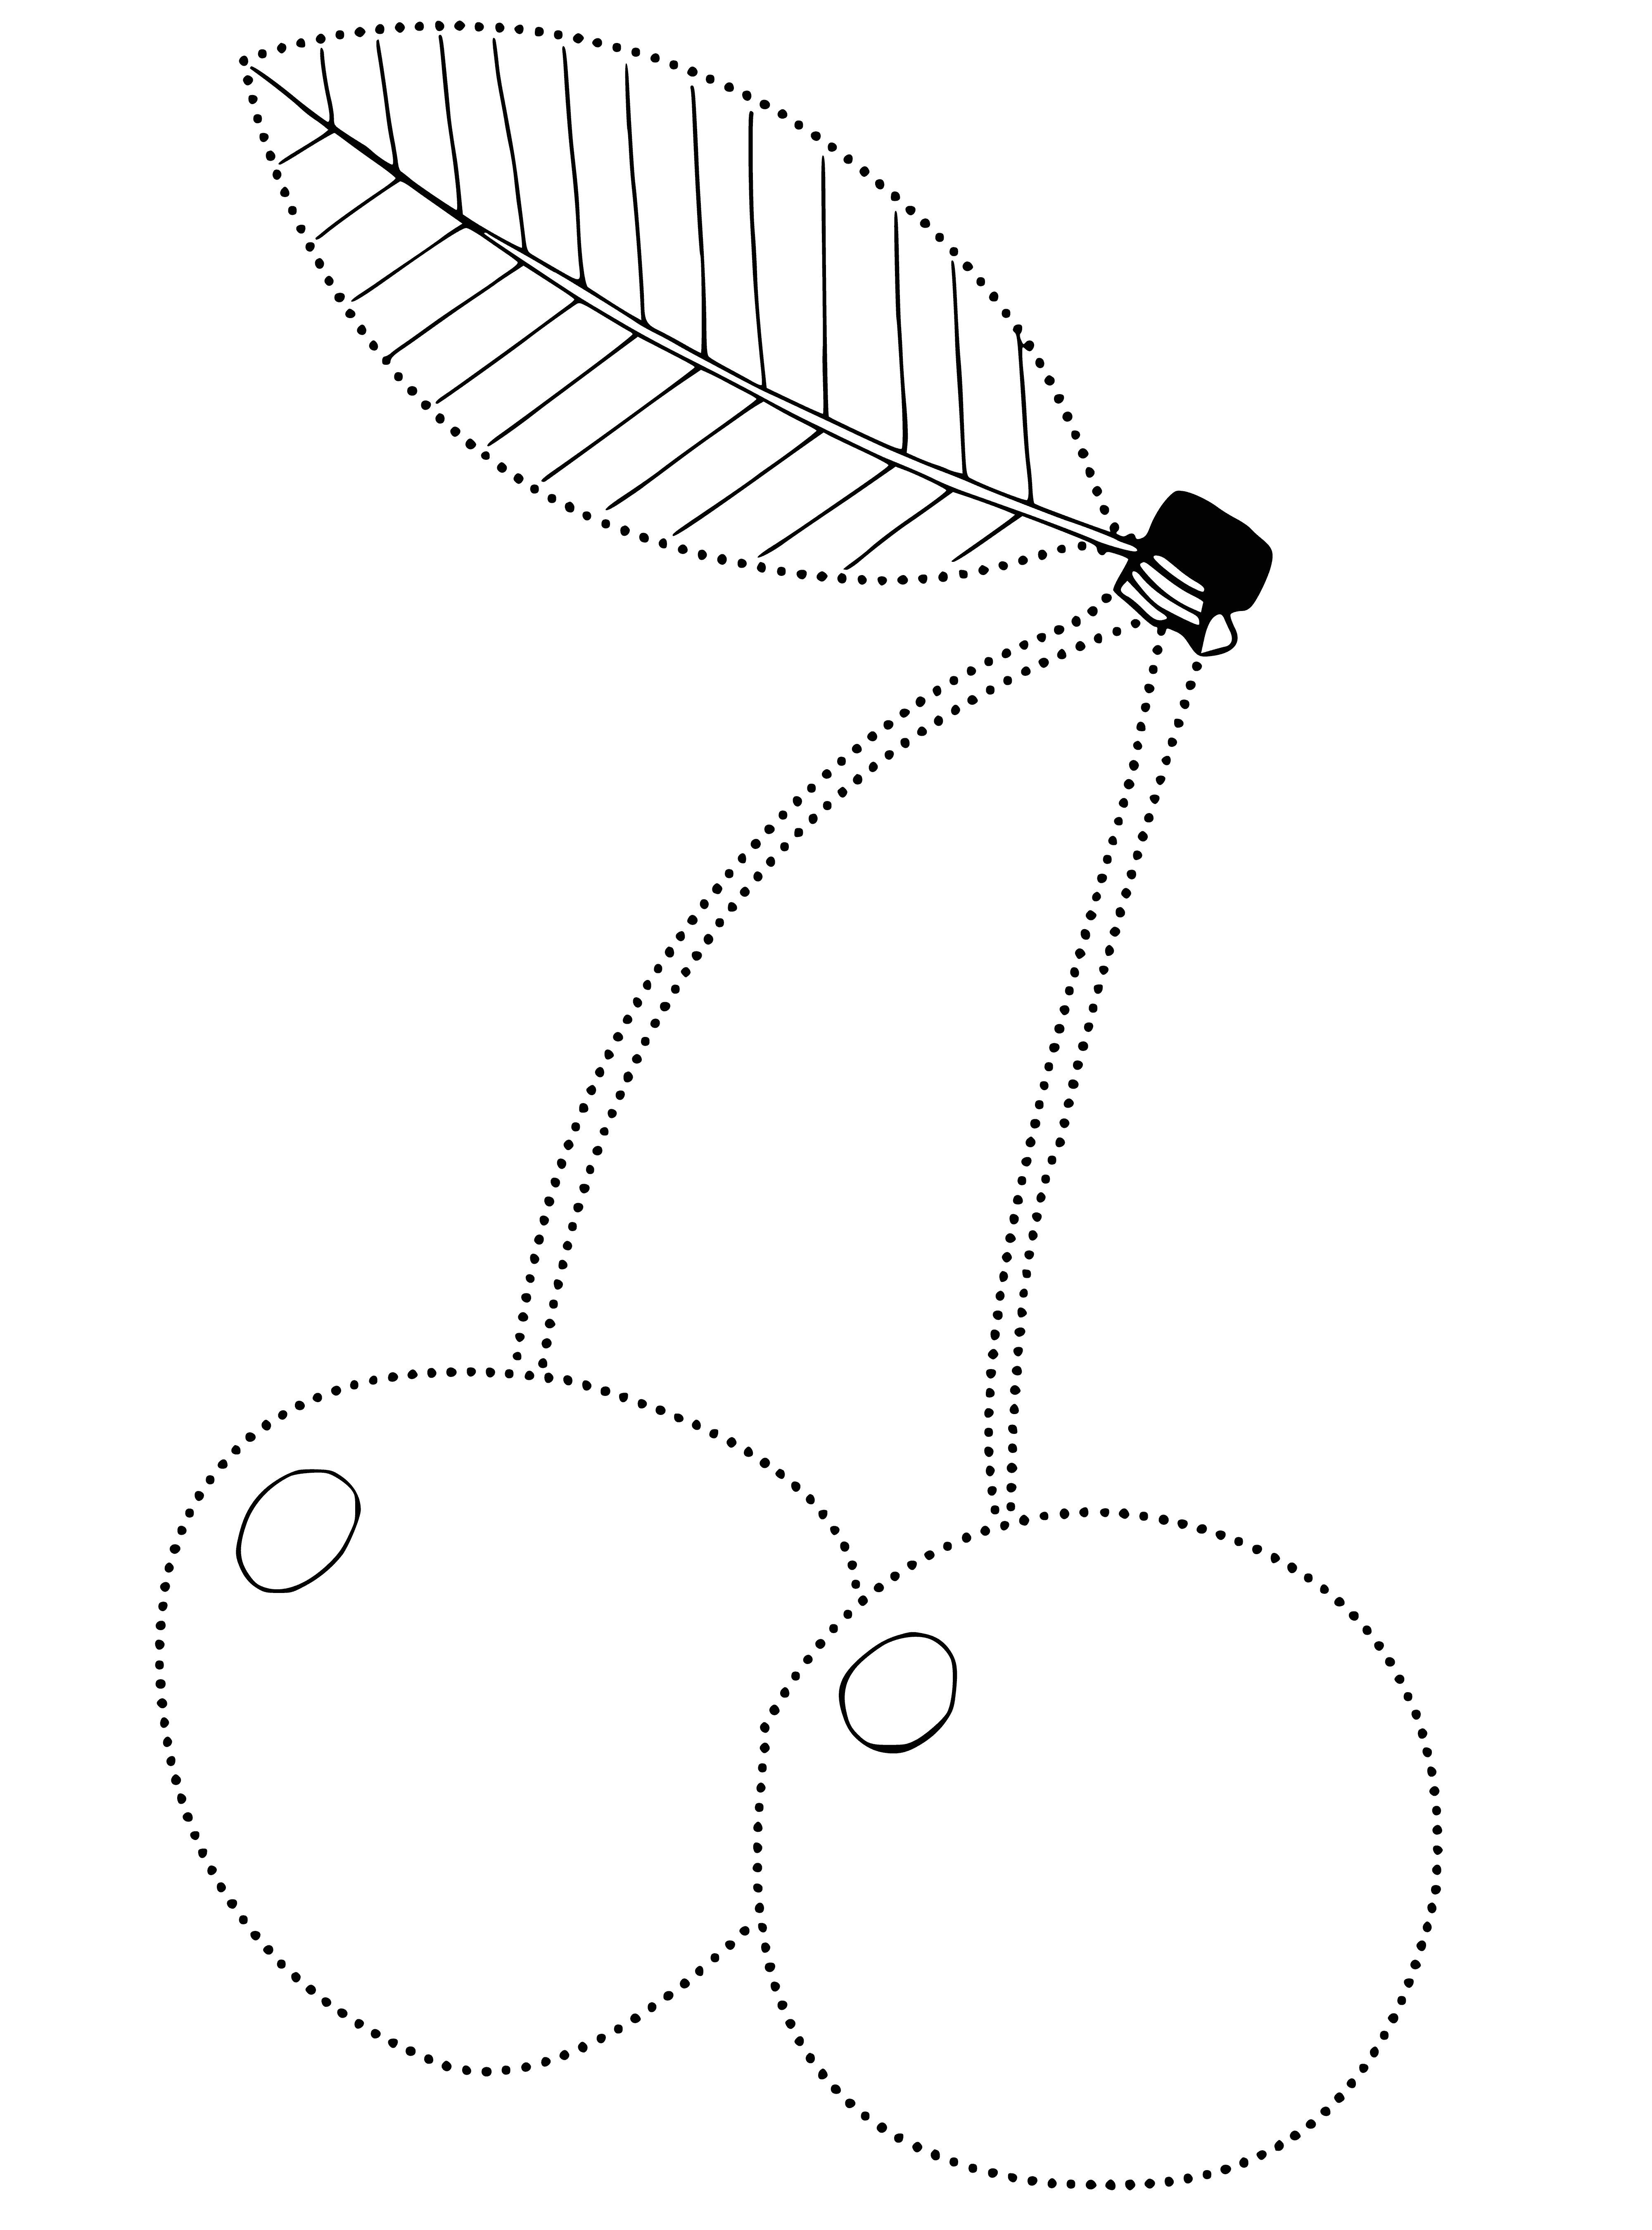 coloring page: -> Cherries in colorful variety with stems and leaves, some with bites, are found in the coloring page.